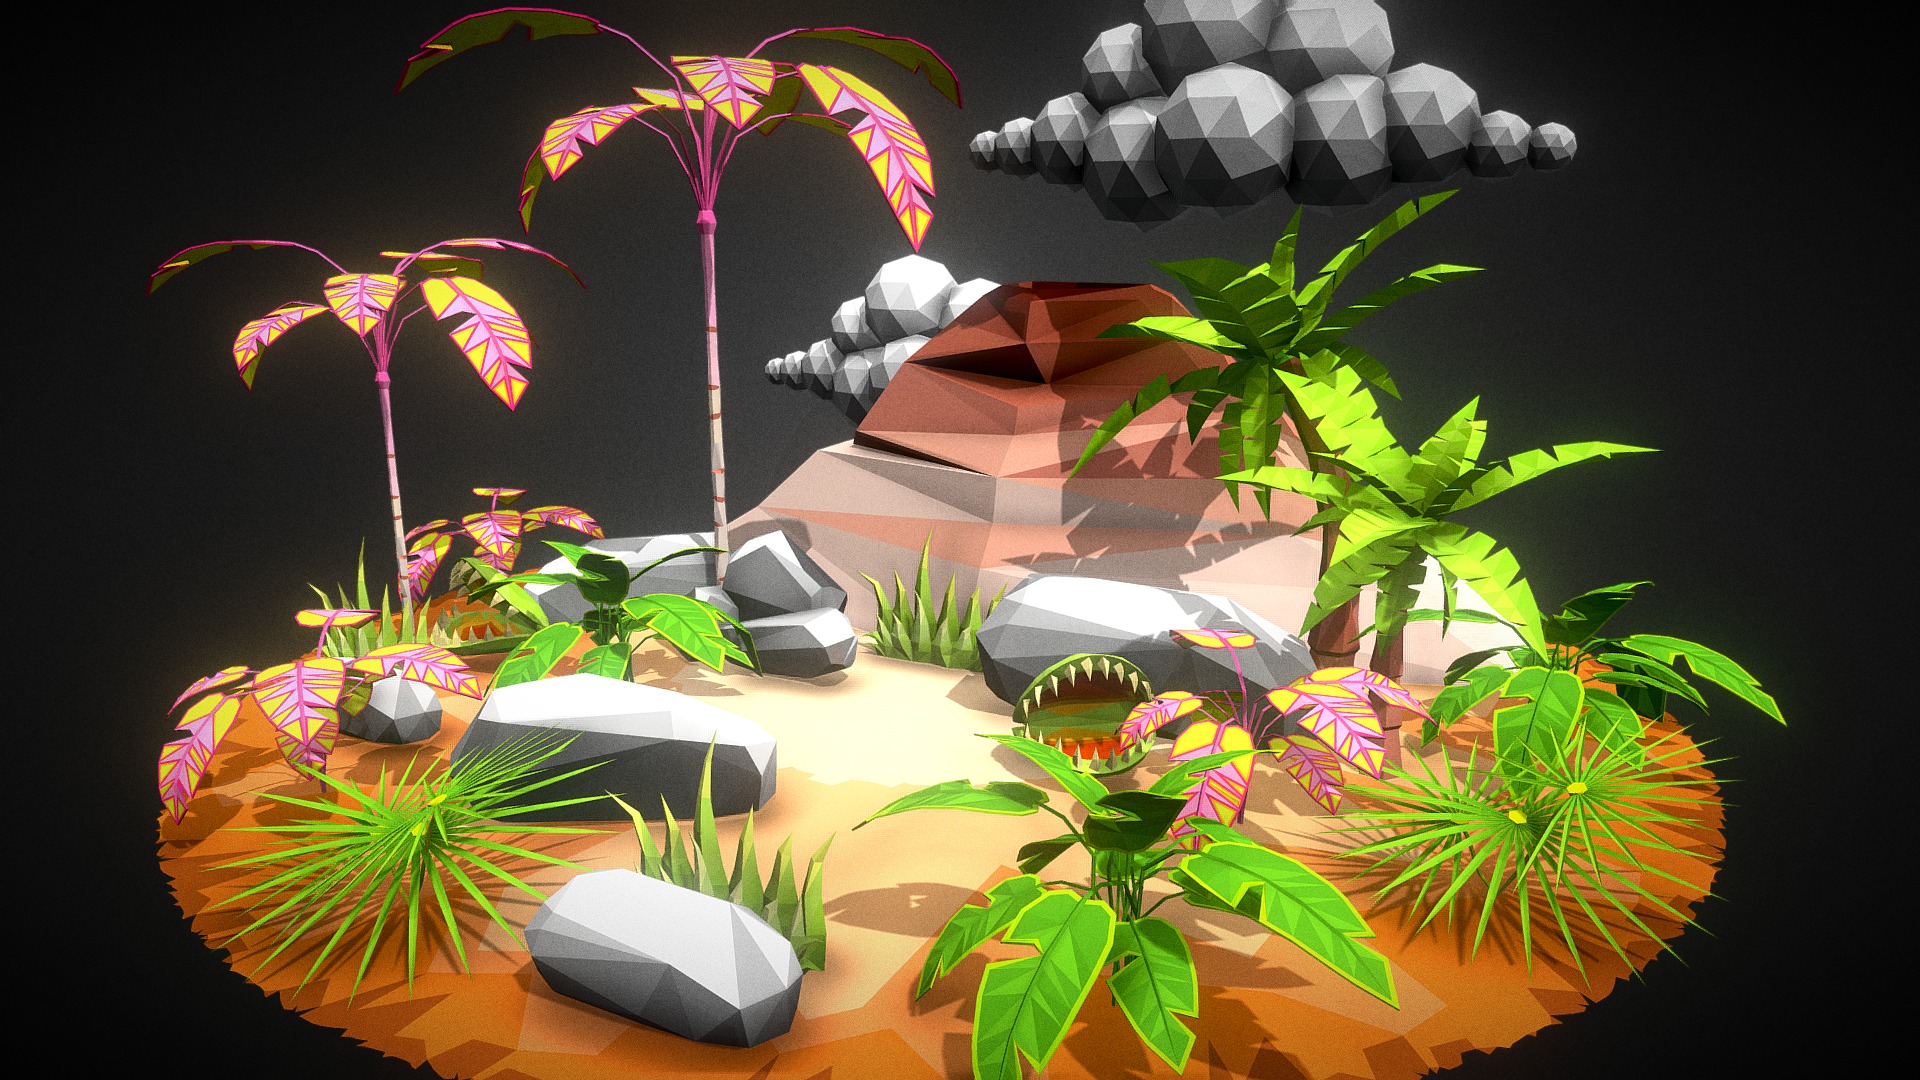 3D model Low Poly Environment Set 002 – Tropical Assets - This is a 3D model of the Low Poly Environment Set 002 - Tropical Assets. The 3D model is about a group of plants and rocks.